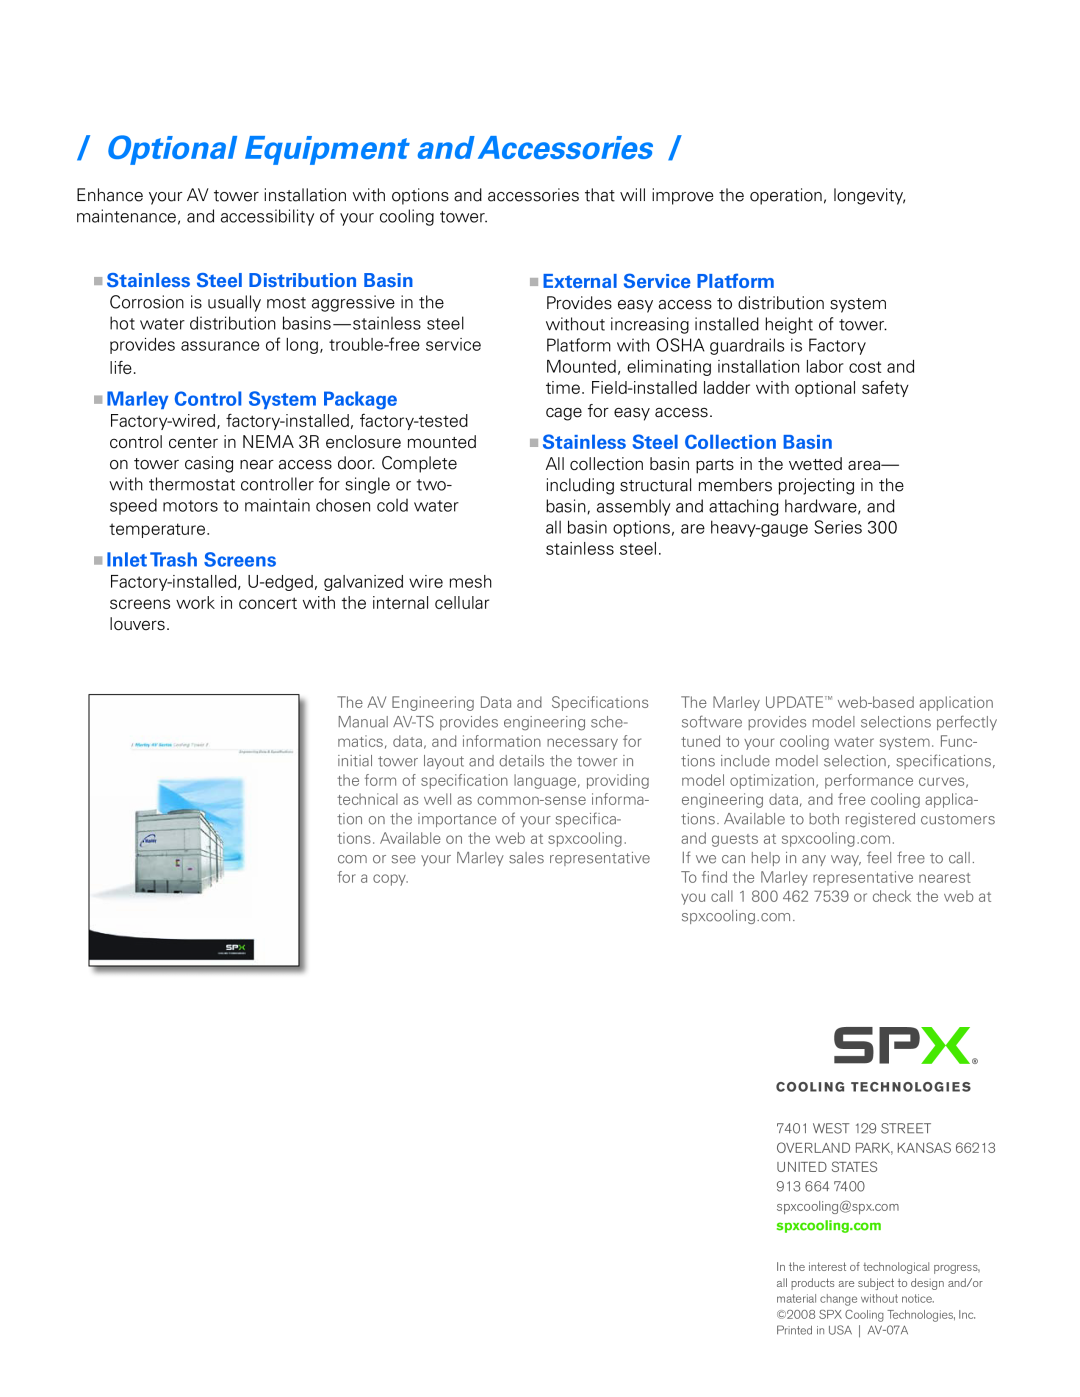 SPX Cooling Technologies MarleyAV Series manual Optional Equipment and Accessories, nStainless Steel Distribution Basin 